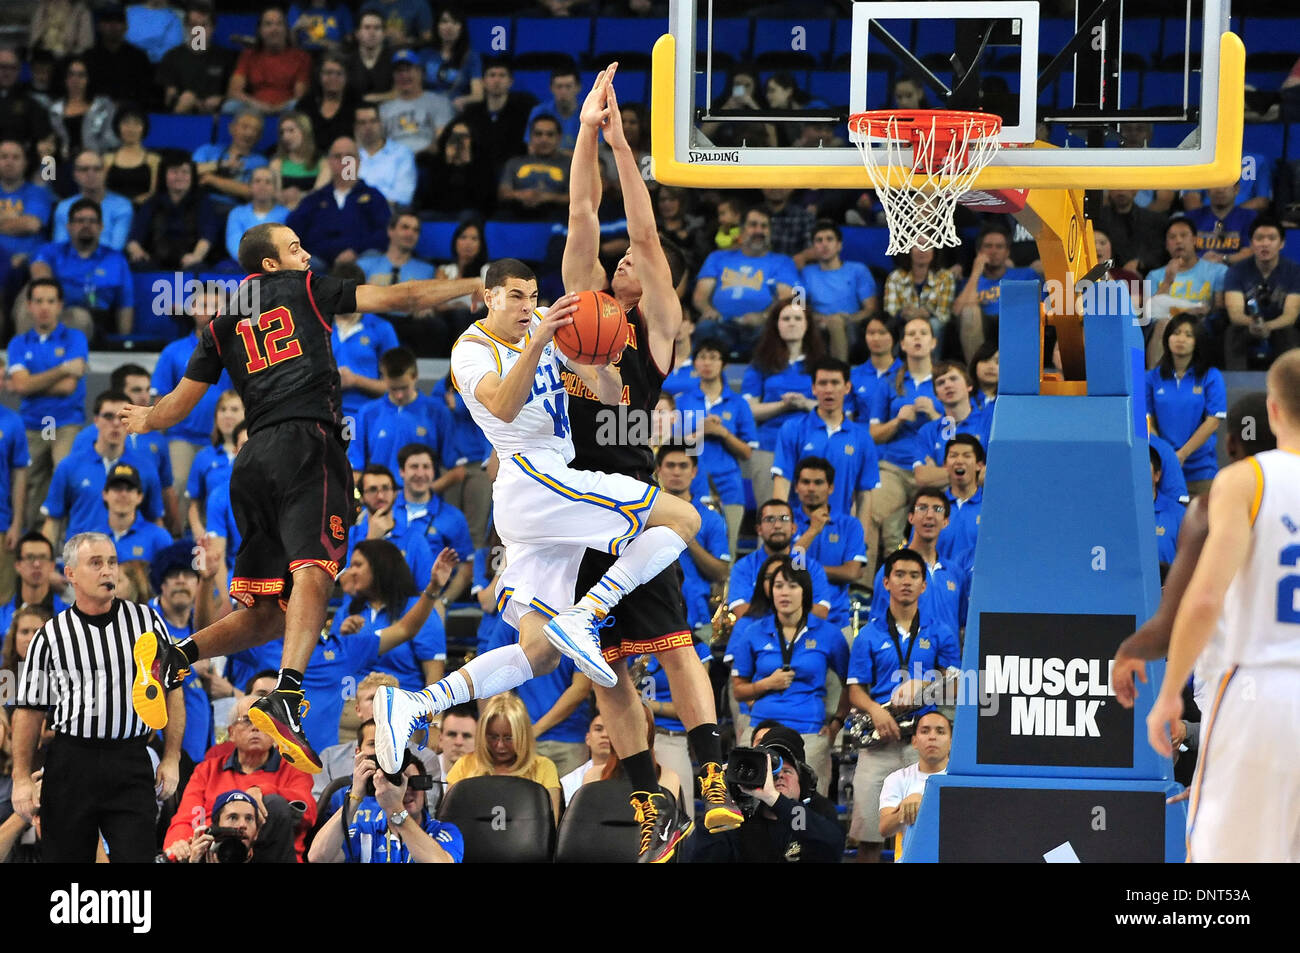 Los Angeles, CA, USA. 5th Jan, 2014. UCLA Bruins guard Zach LaVine #14 moves the ball in the first half during the College Basketball game between the USC Trojans and the UCLA Bruins at Pauley Pavilion in Los Angeles, California.Louis Lopez/CSM/Alamy Live News Stock Photo